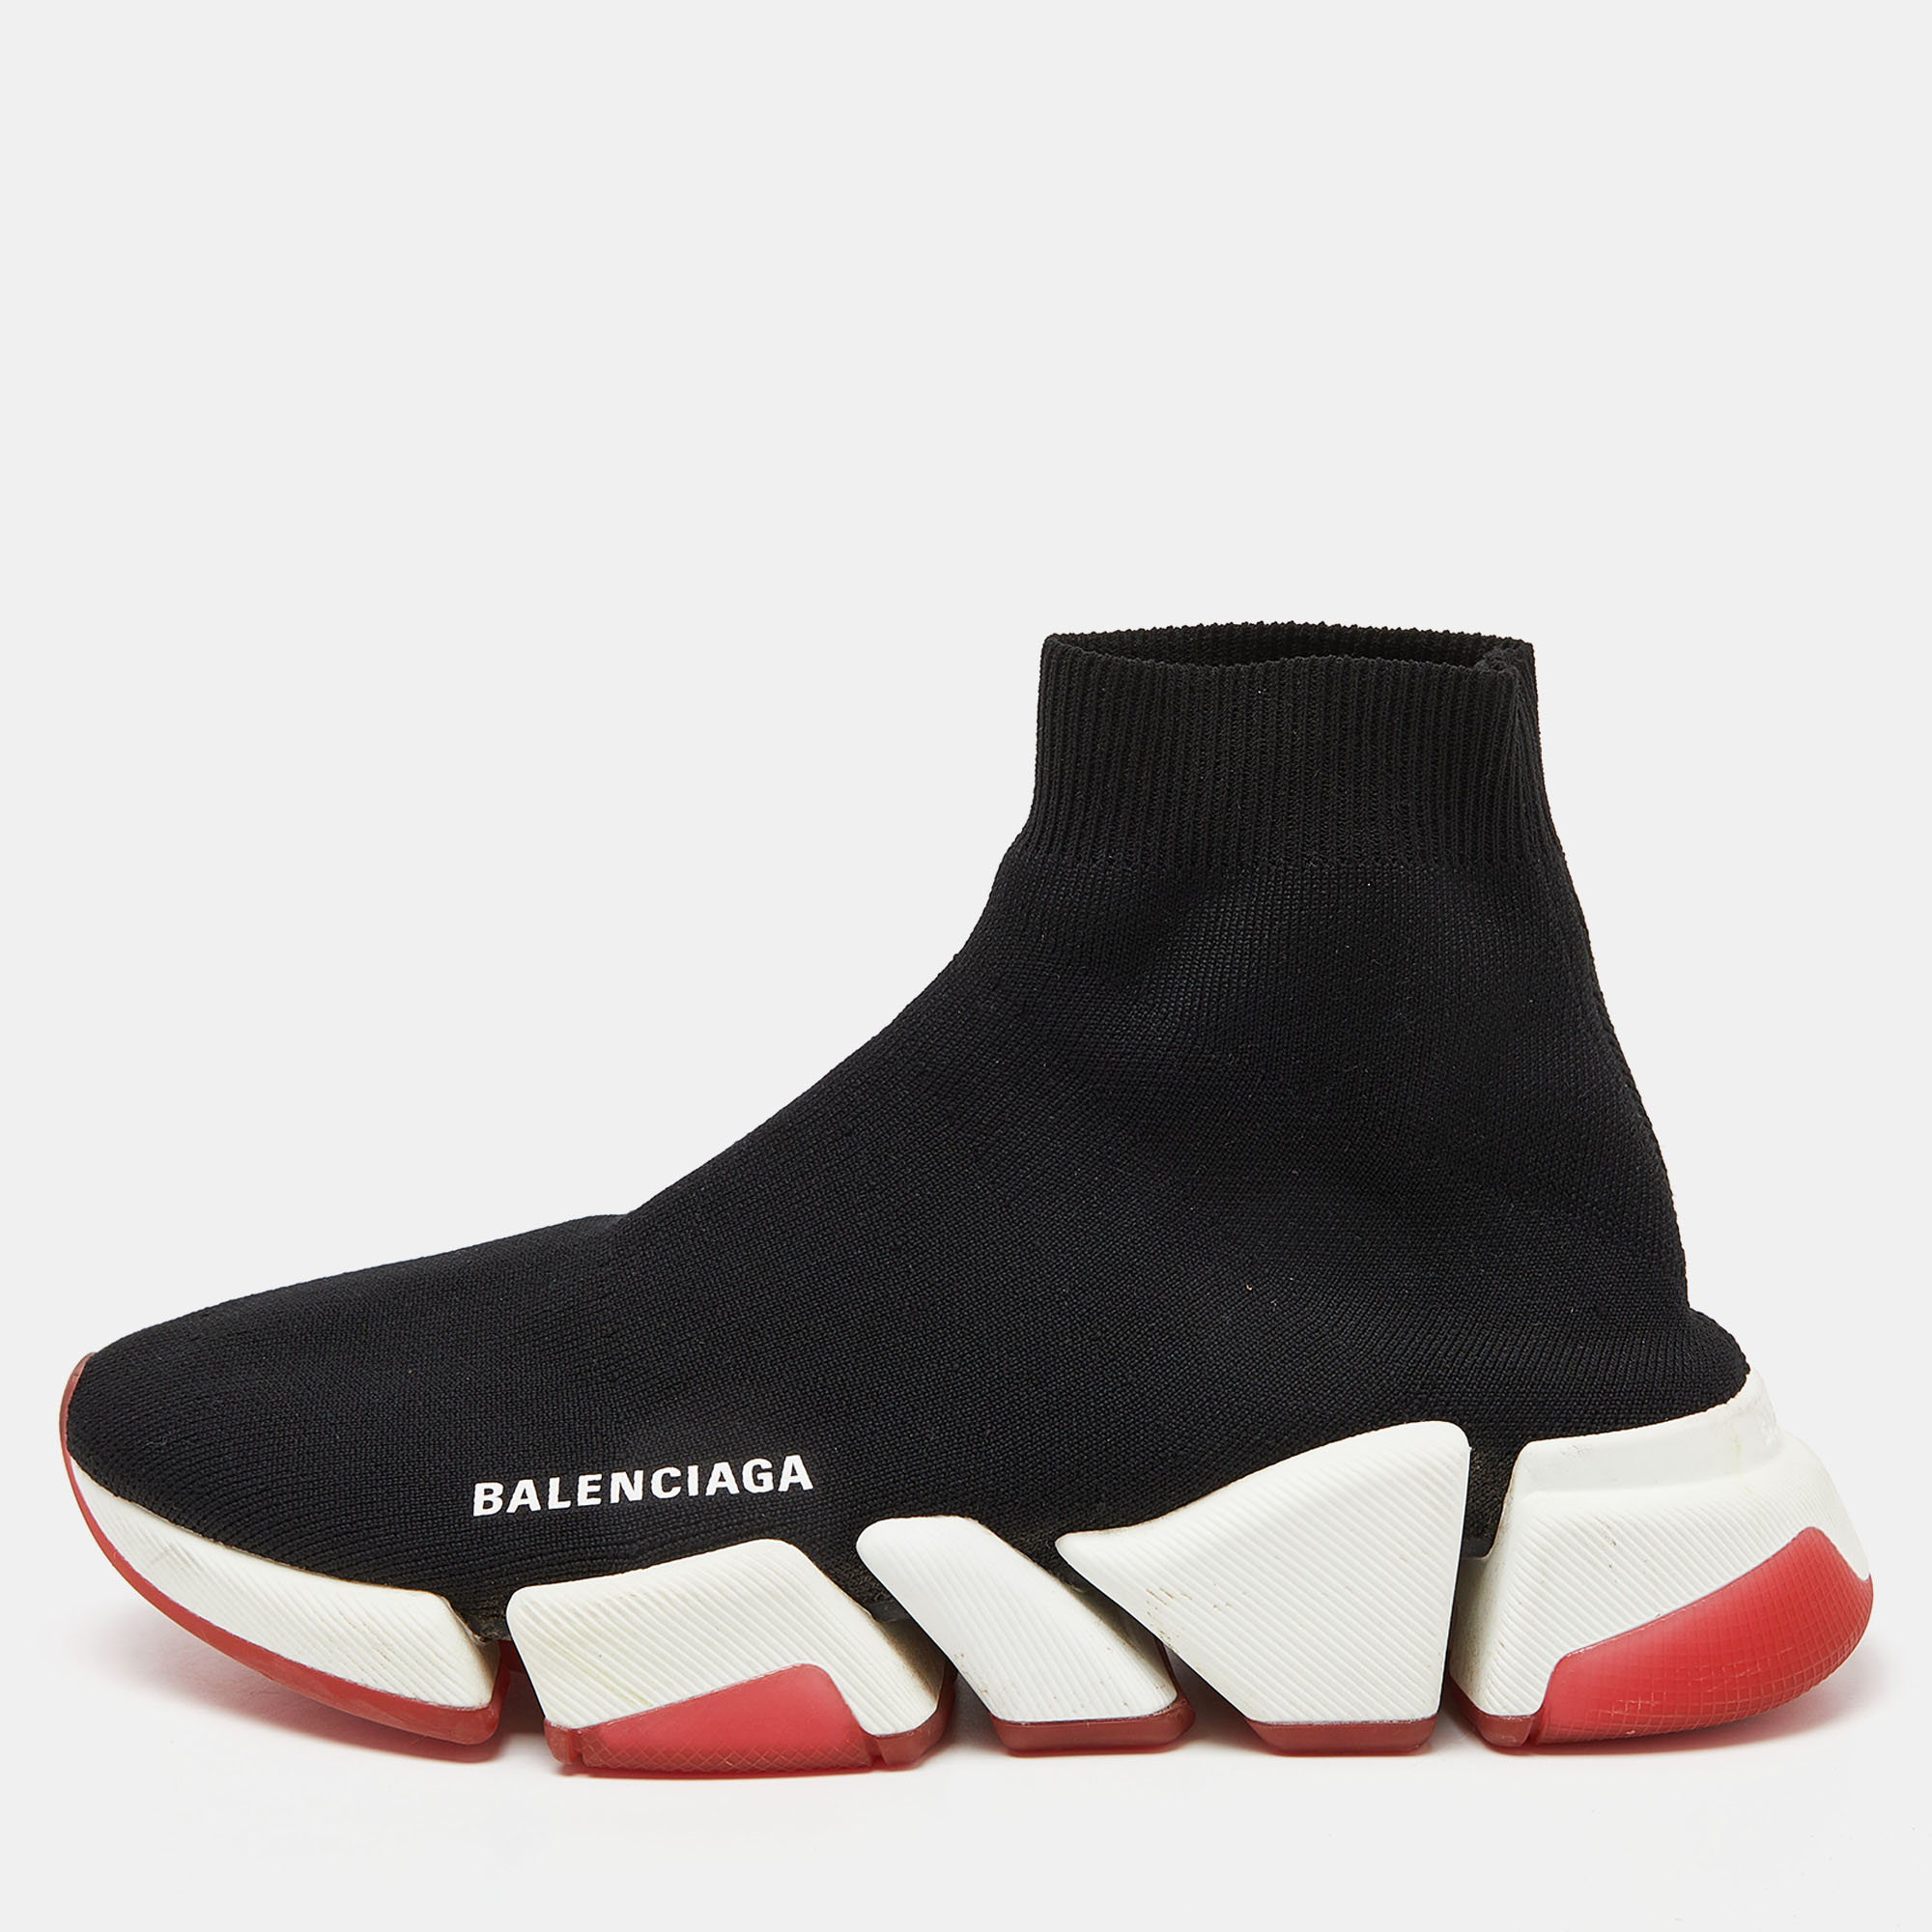 Pre-owned Balenciaga Black Knit Fabric Speed Trainer Sneakers Size 38